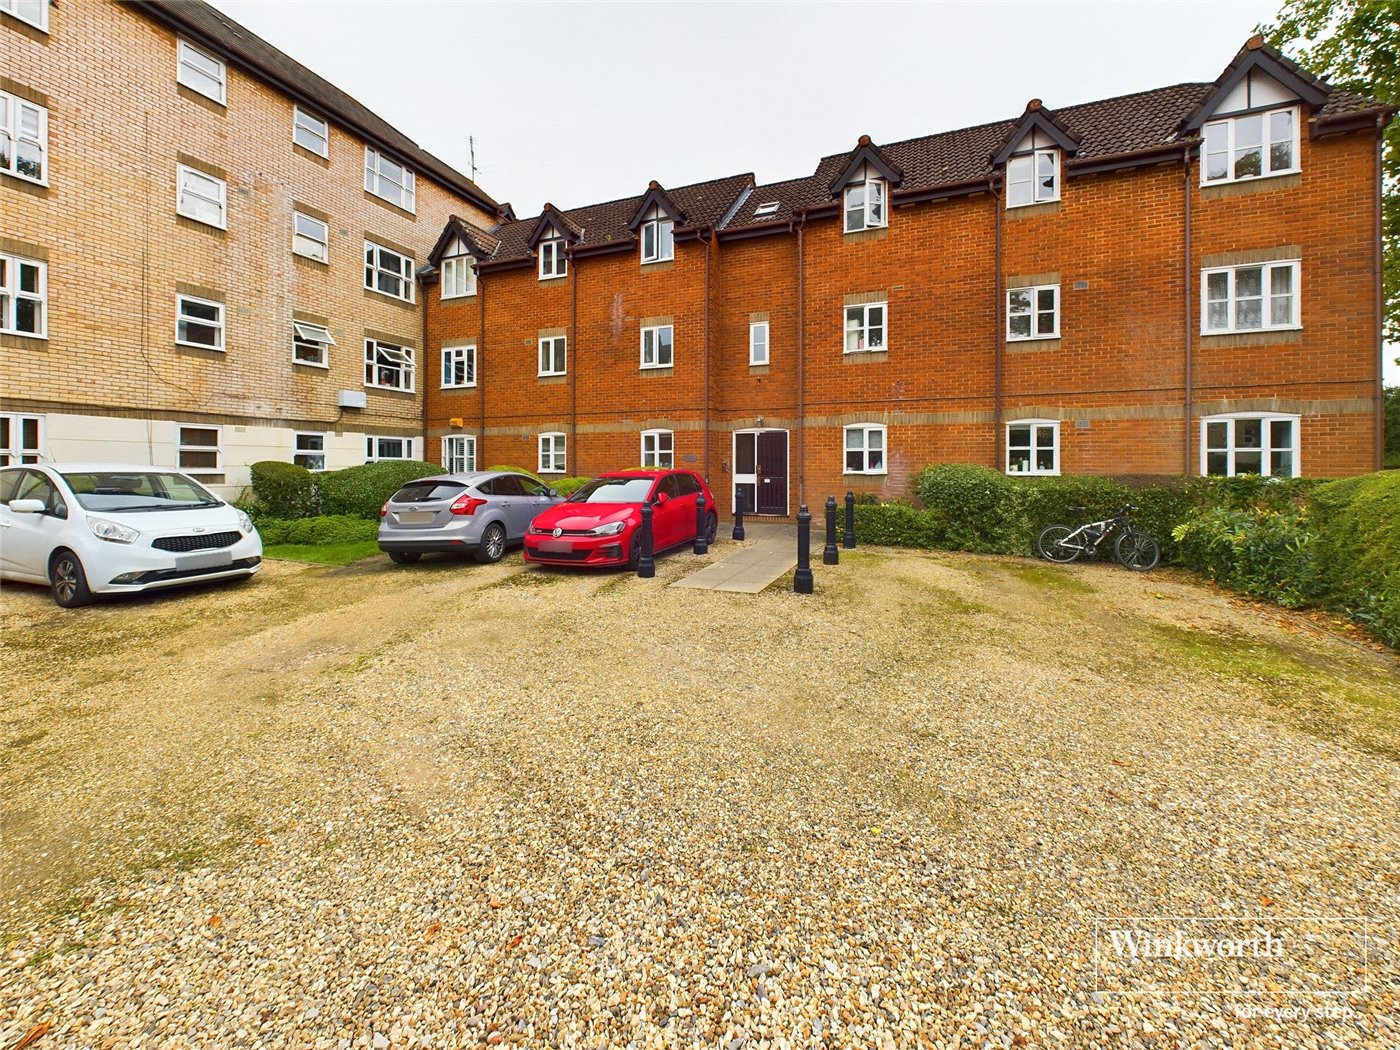 Ashdown House, Rembrandt Way, Reading, Berkshire, RG1 2 bedroom flat/apartment in Rembrandt Way